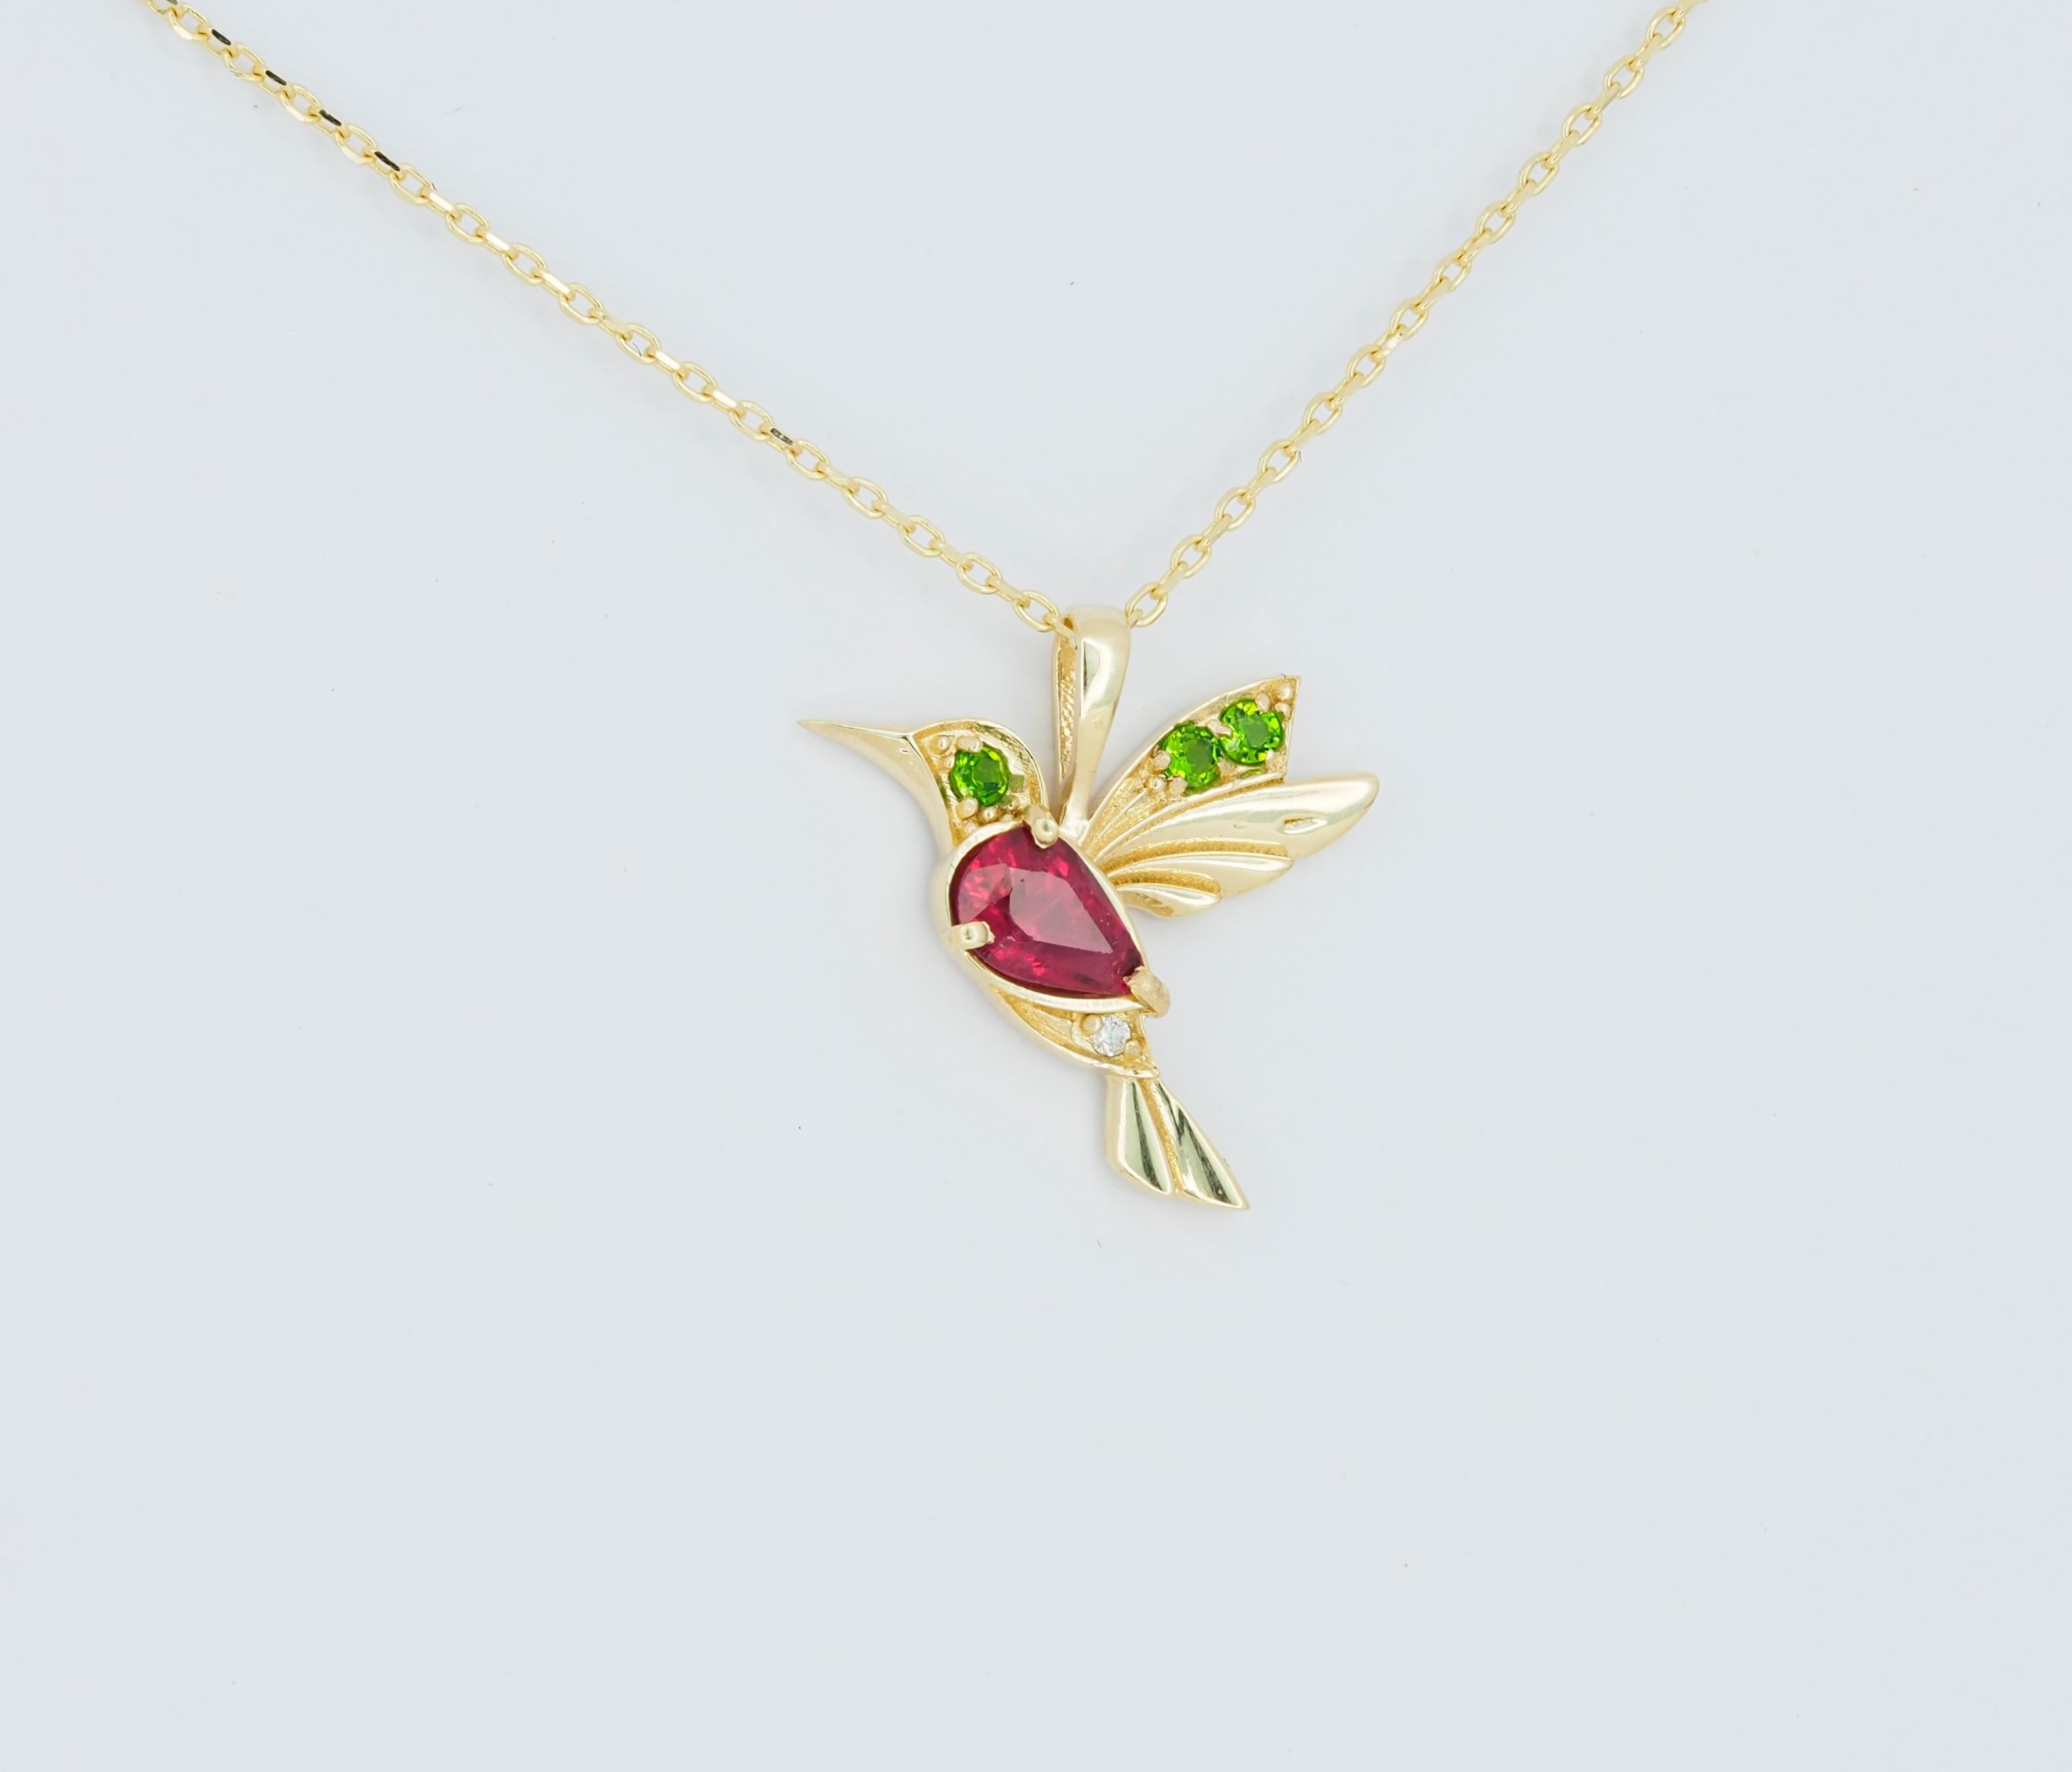 Modern 14k Gold Hummingbird Pendant with Rubies.  For Sale